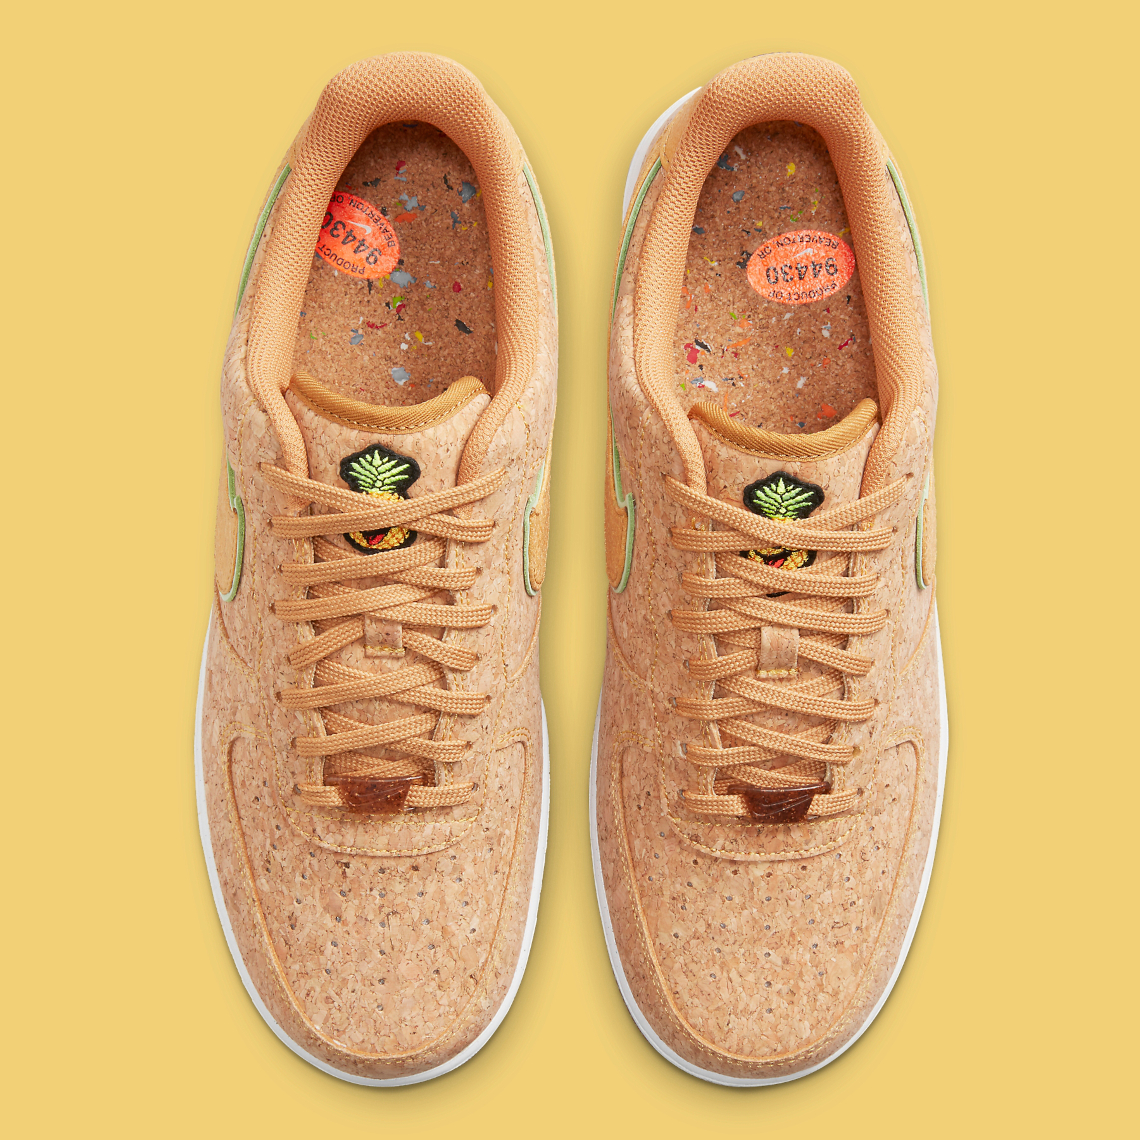 Nike Air Force 1 '07 LV8 *Next Nature* – buy now at Asphaltgold